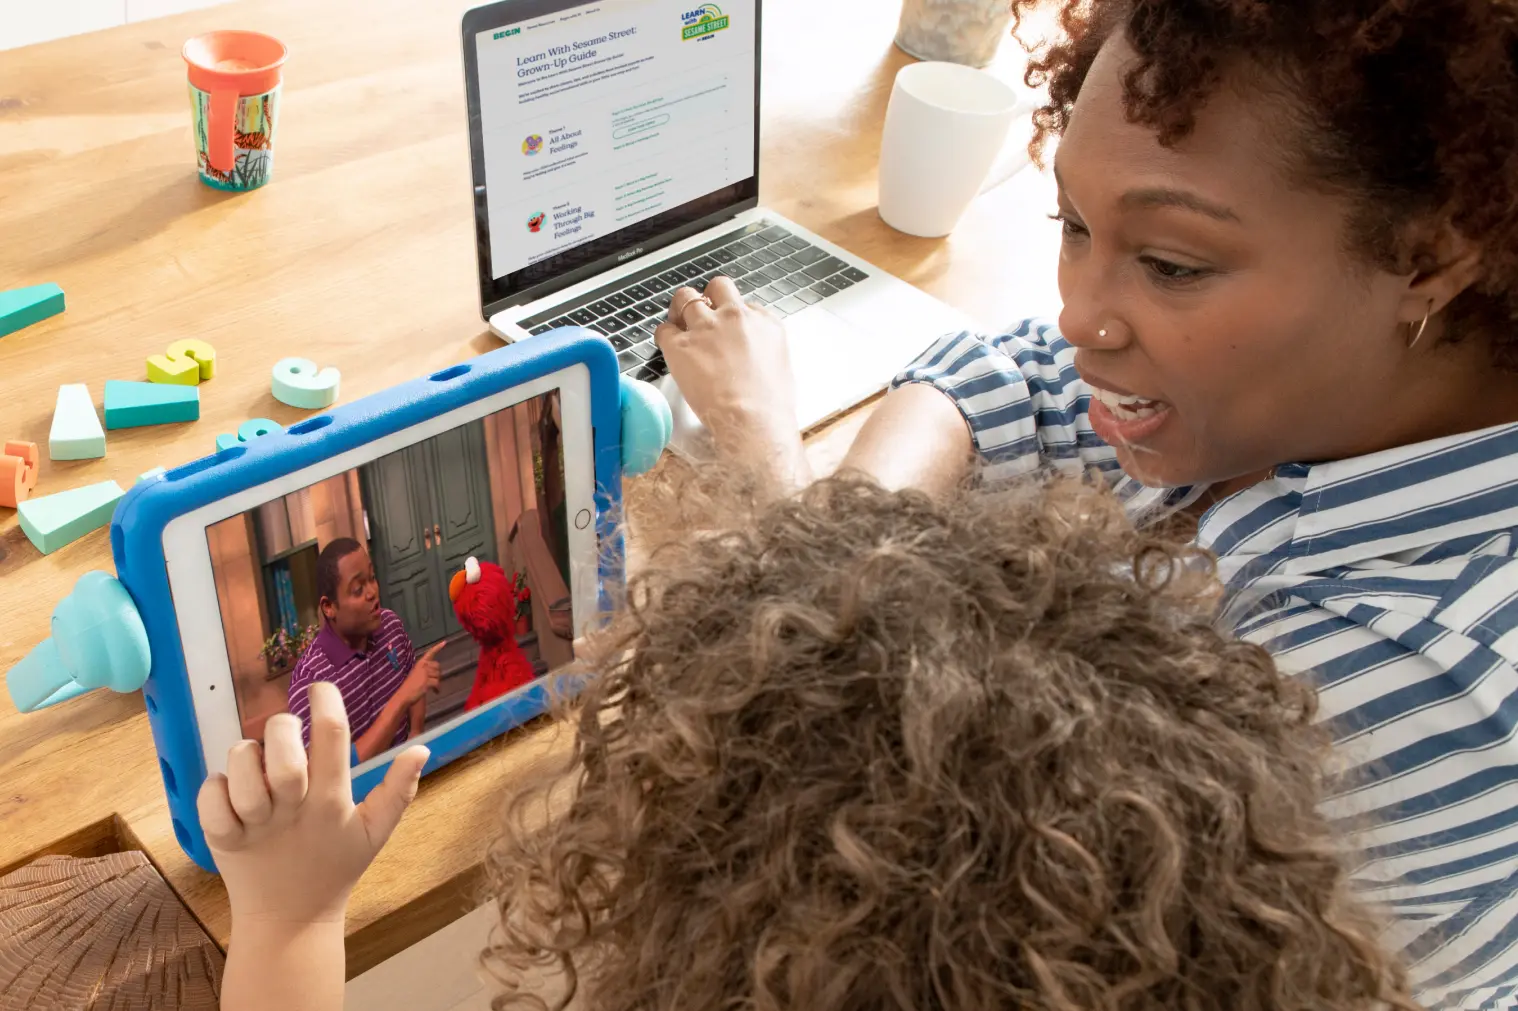 Grown up with Grown-Up Guide and child playing with Learn With Sesame Street app